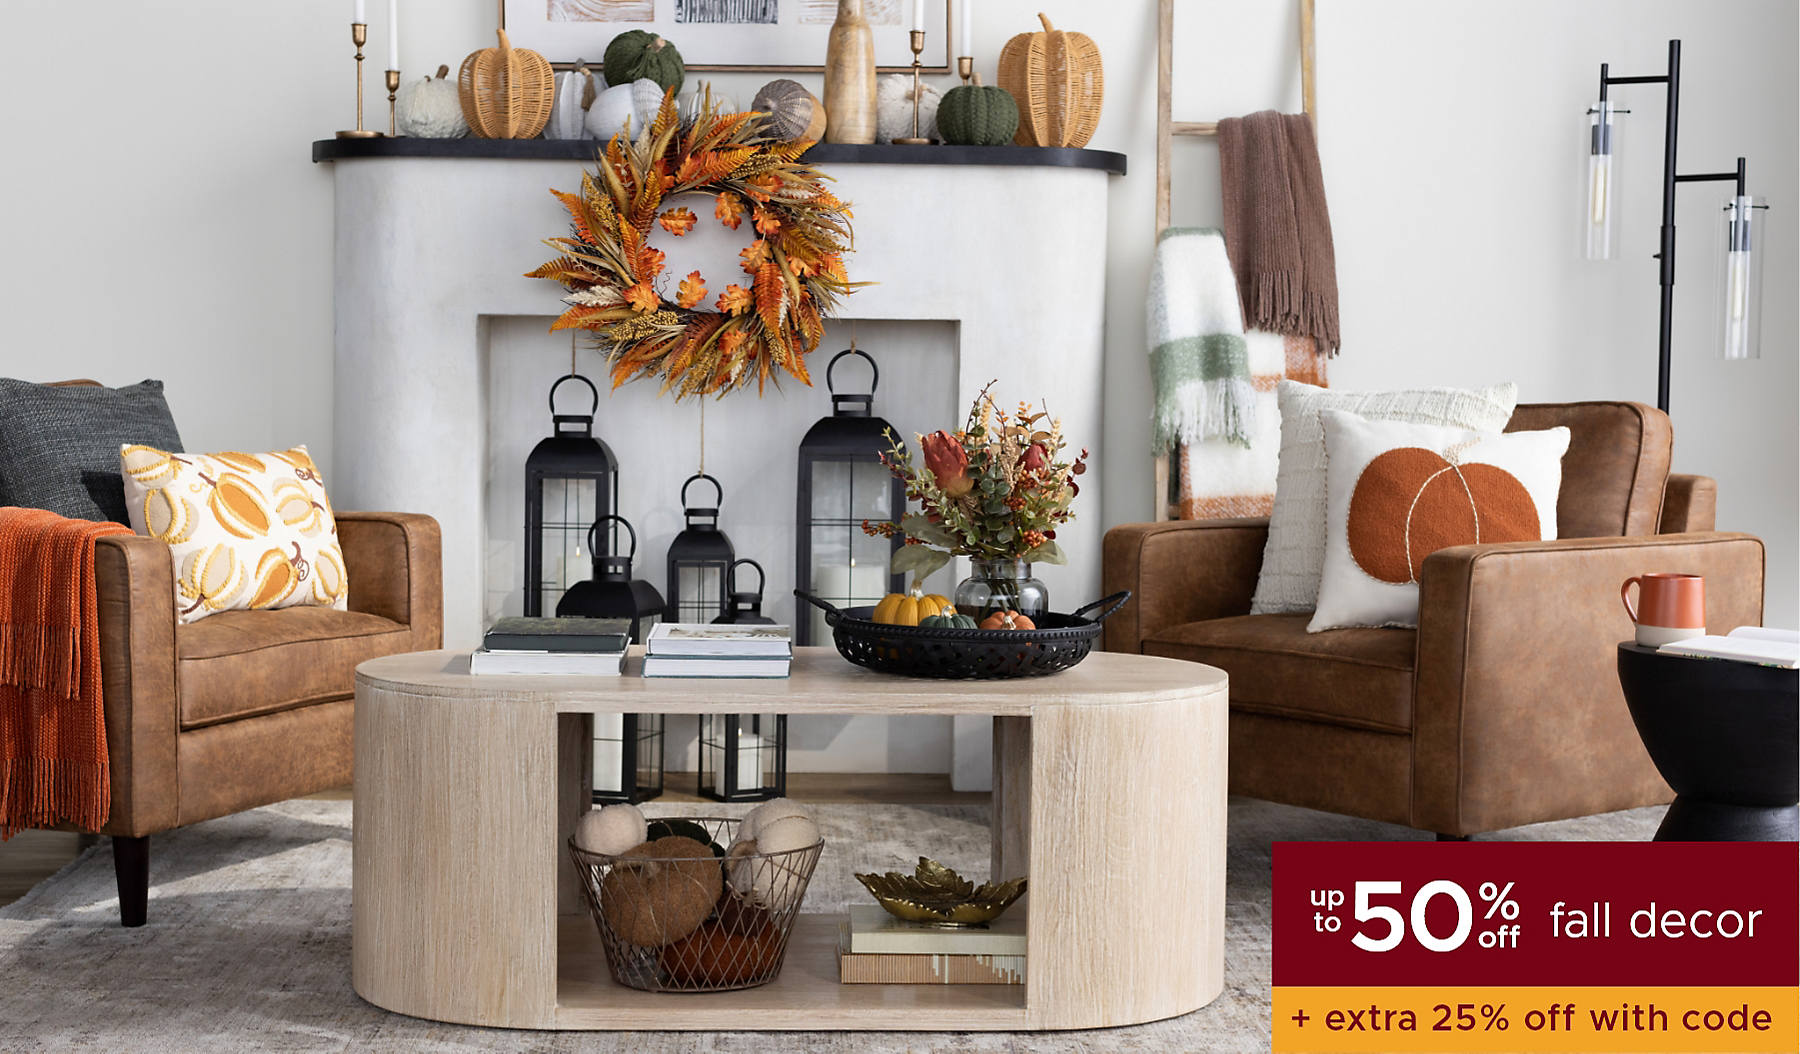 fall decor up to 50% off + extra 25% off with code shop now